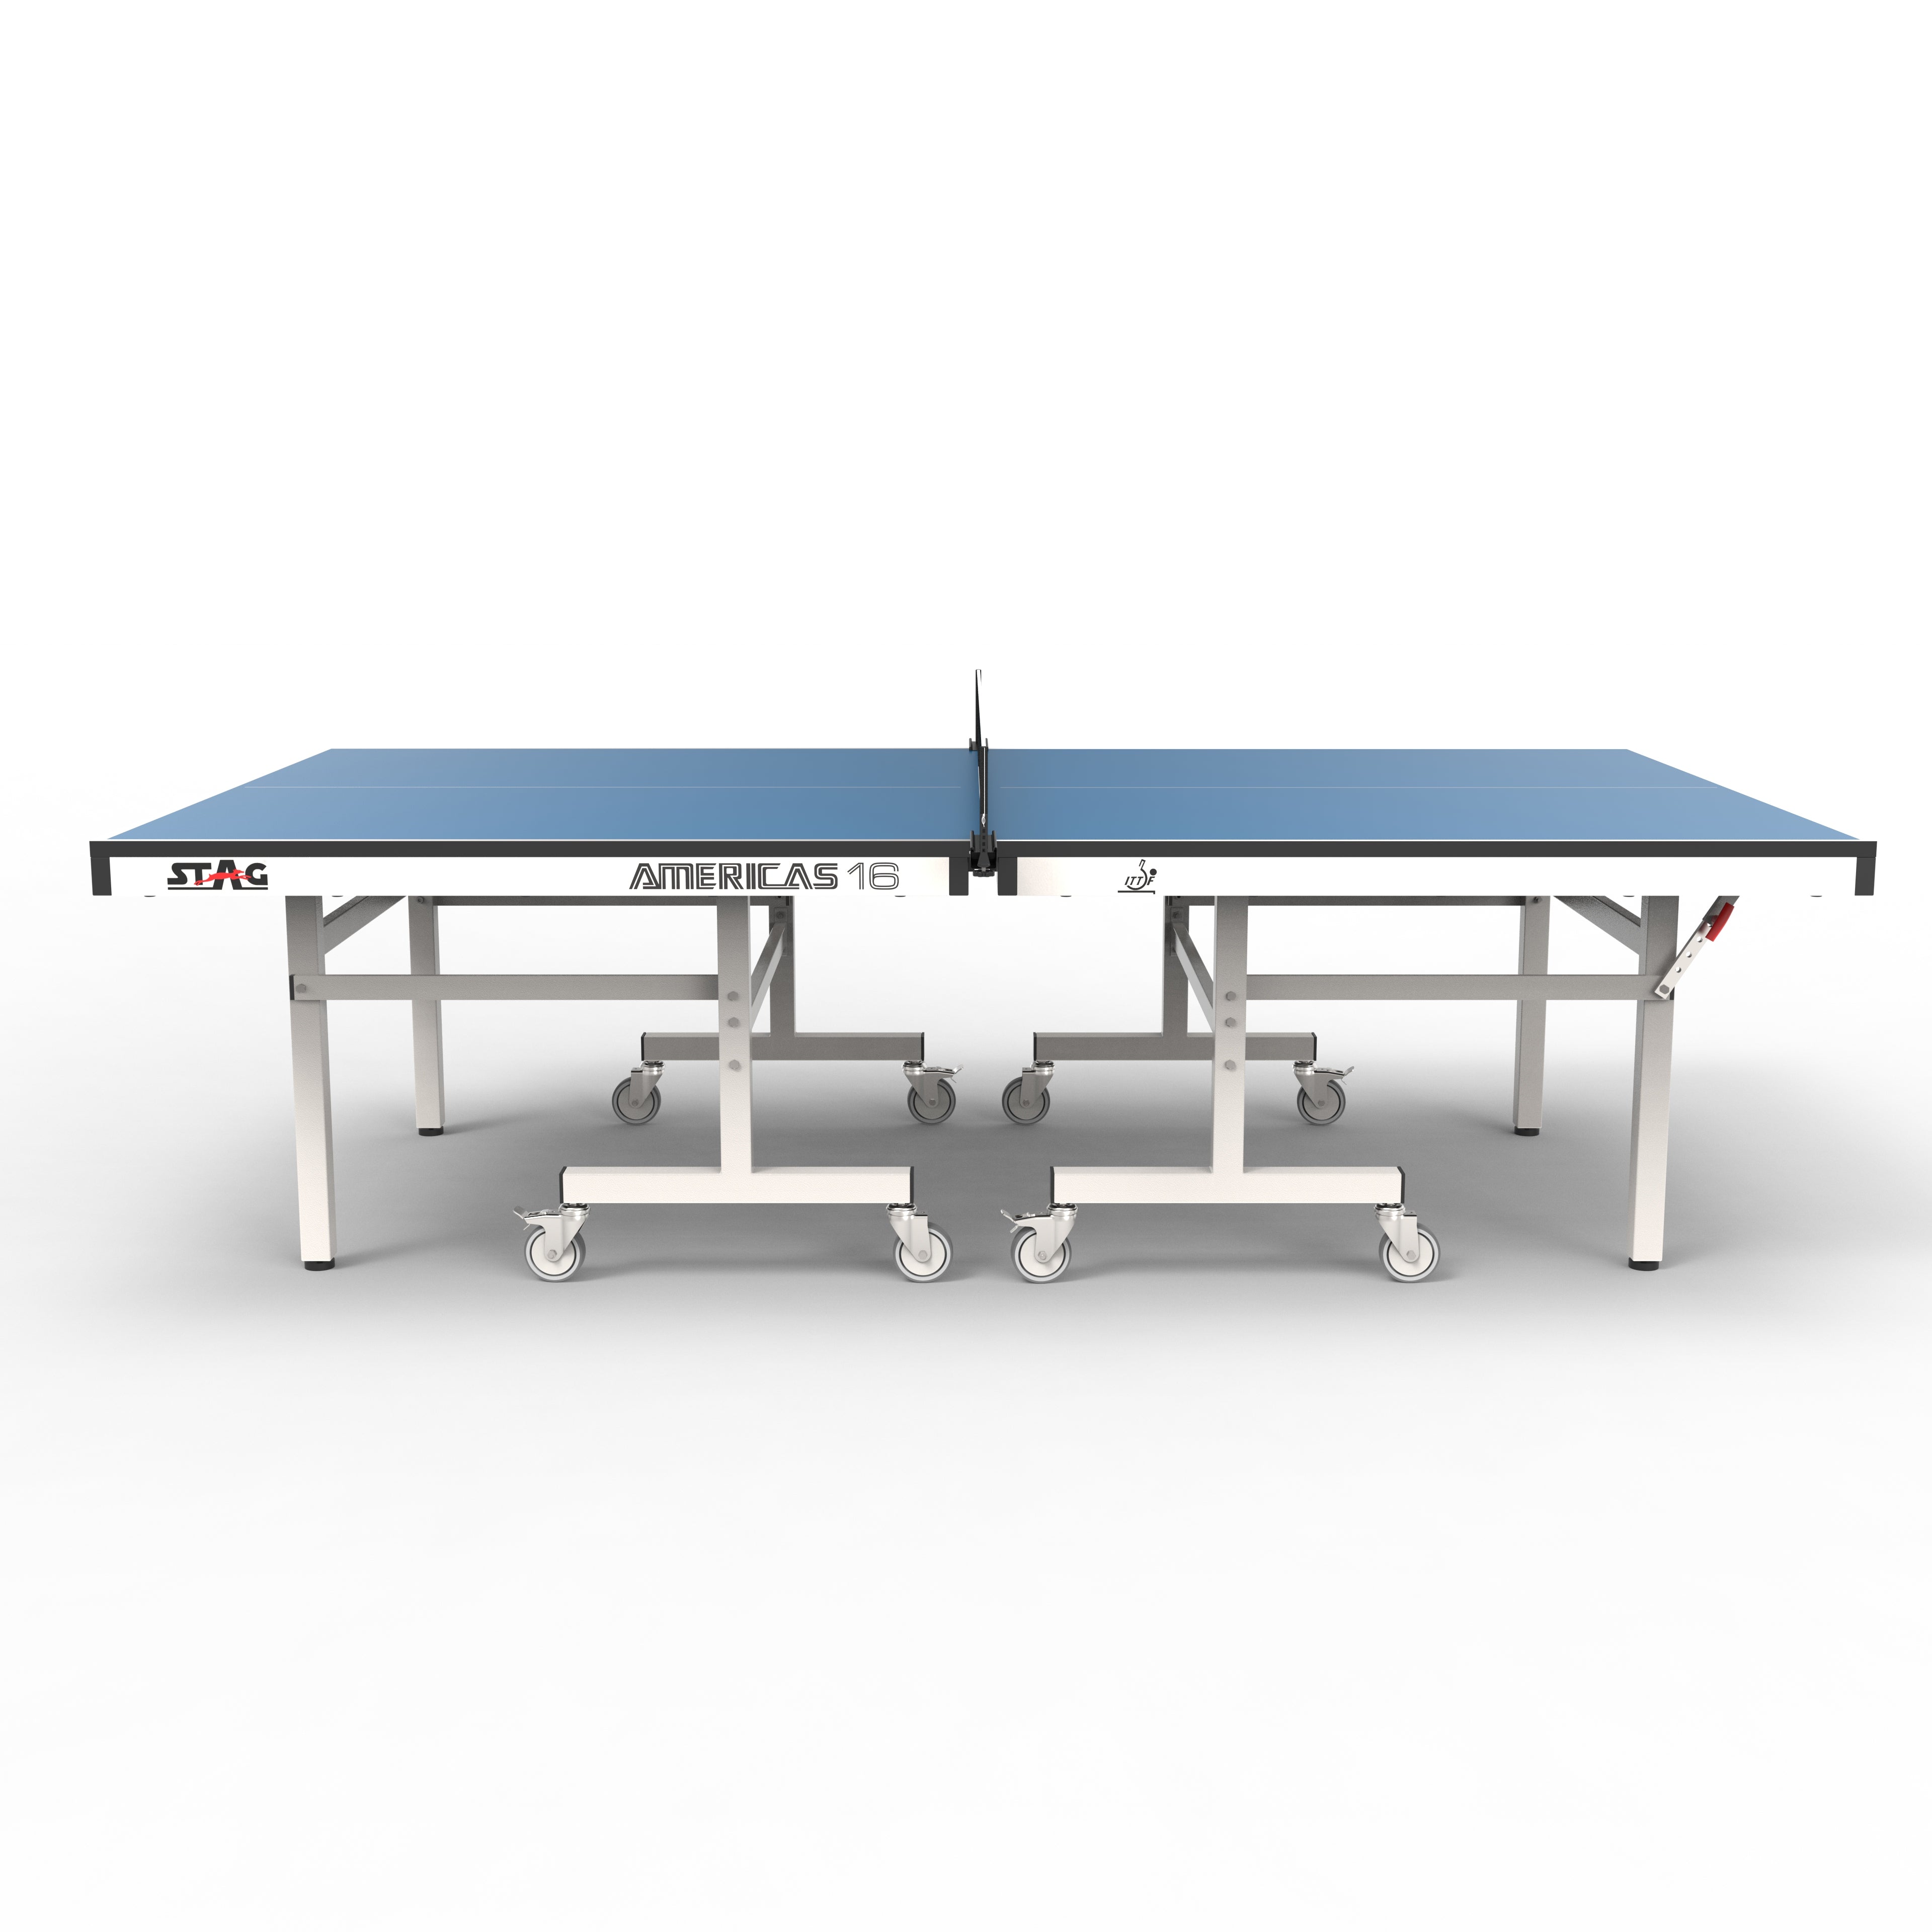 Stag Americas Table Tennis Tables - Used